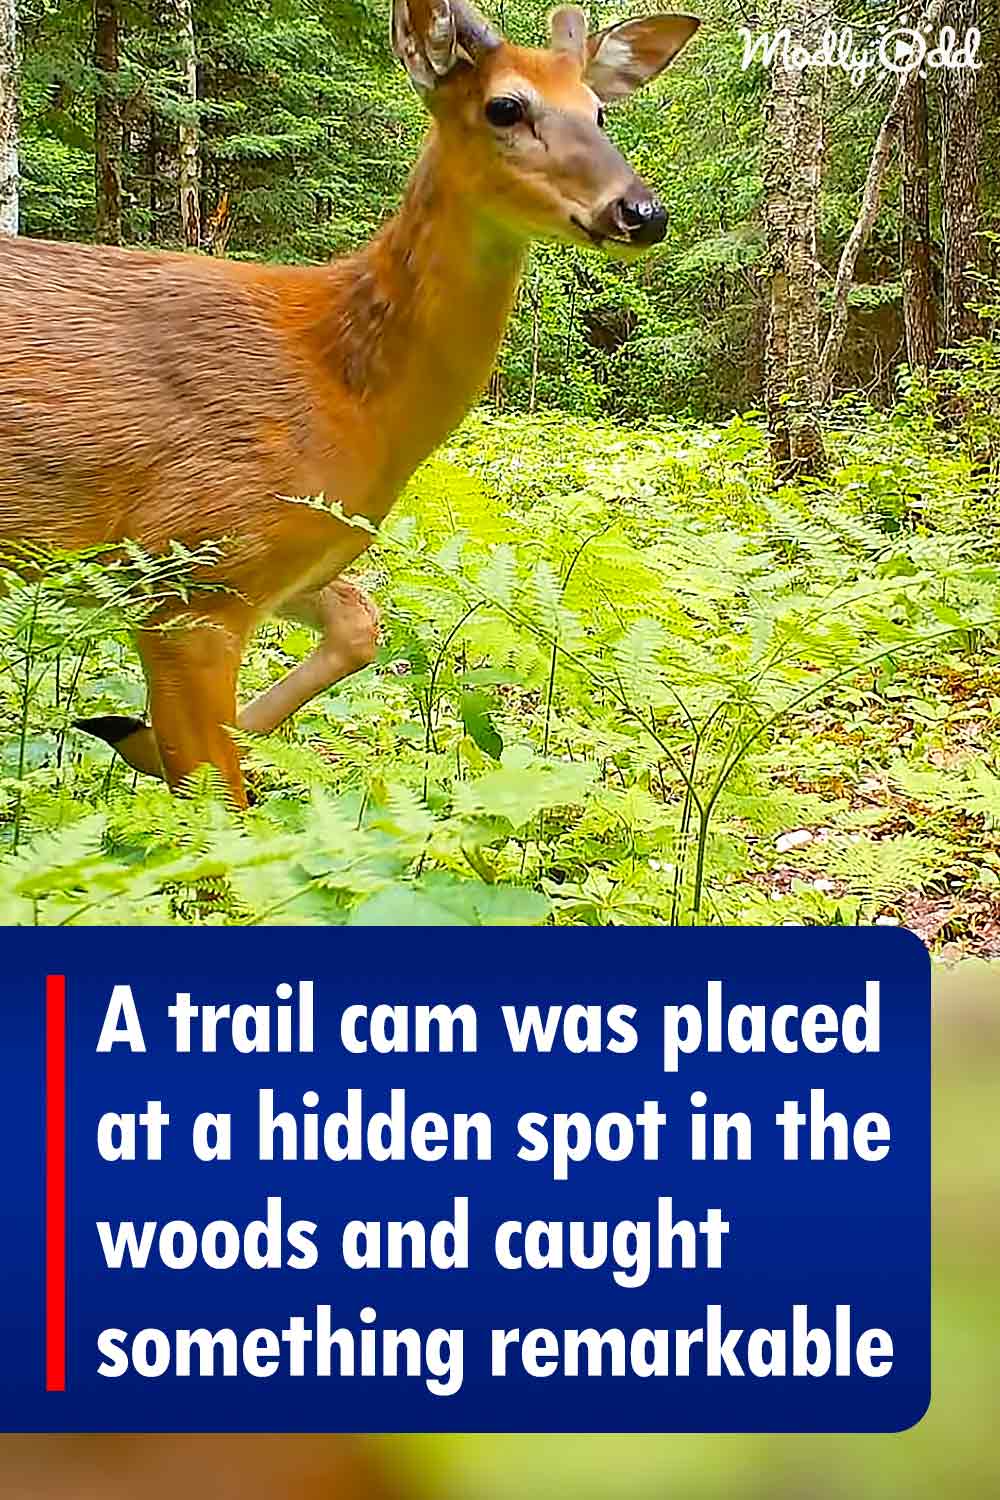 A trail cam was placed at a hidden spot in the woods and caught something remarkable